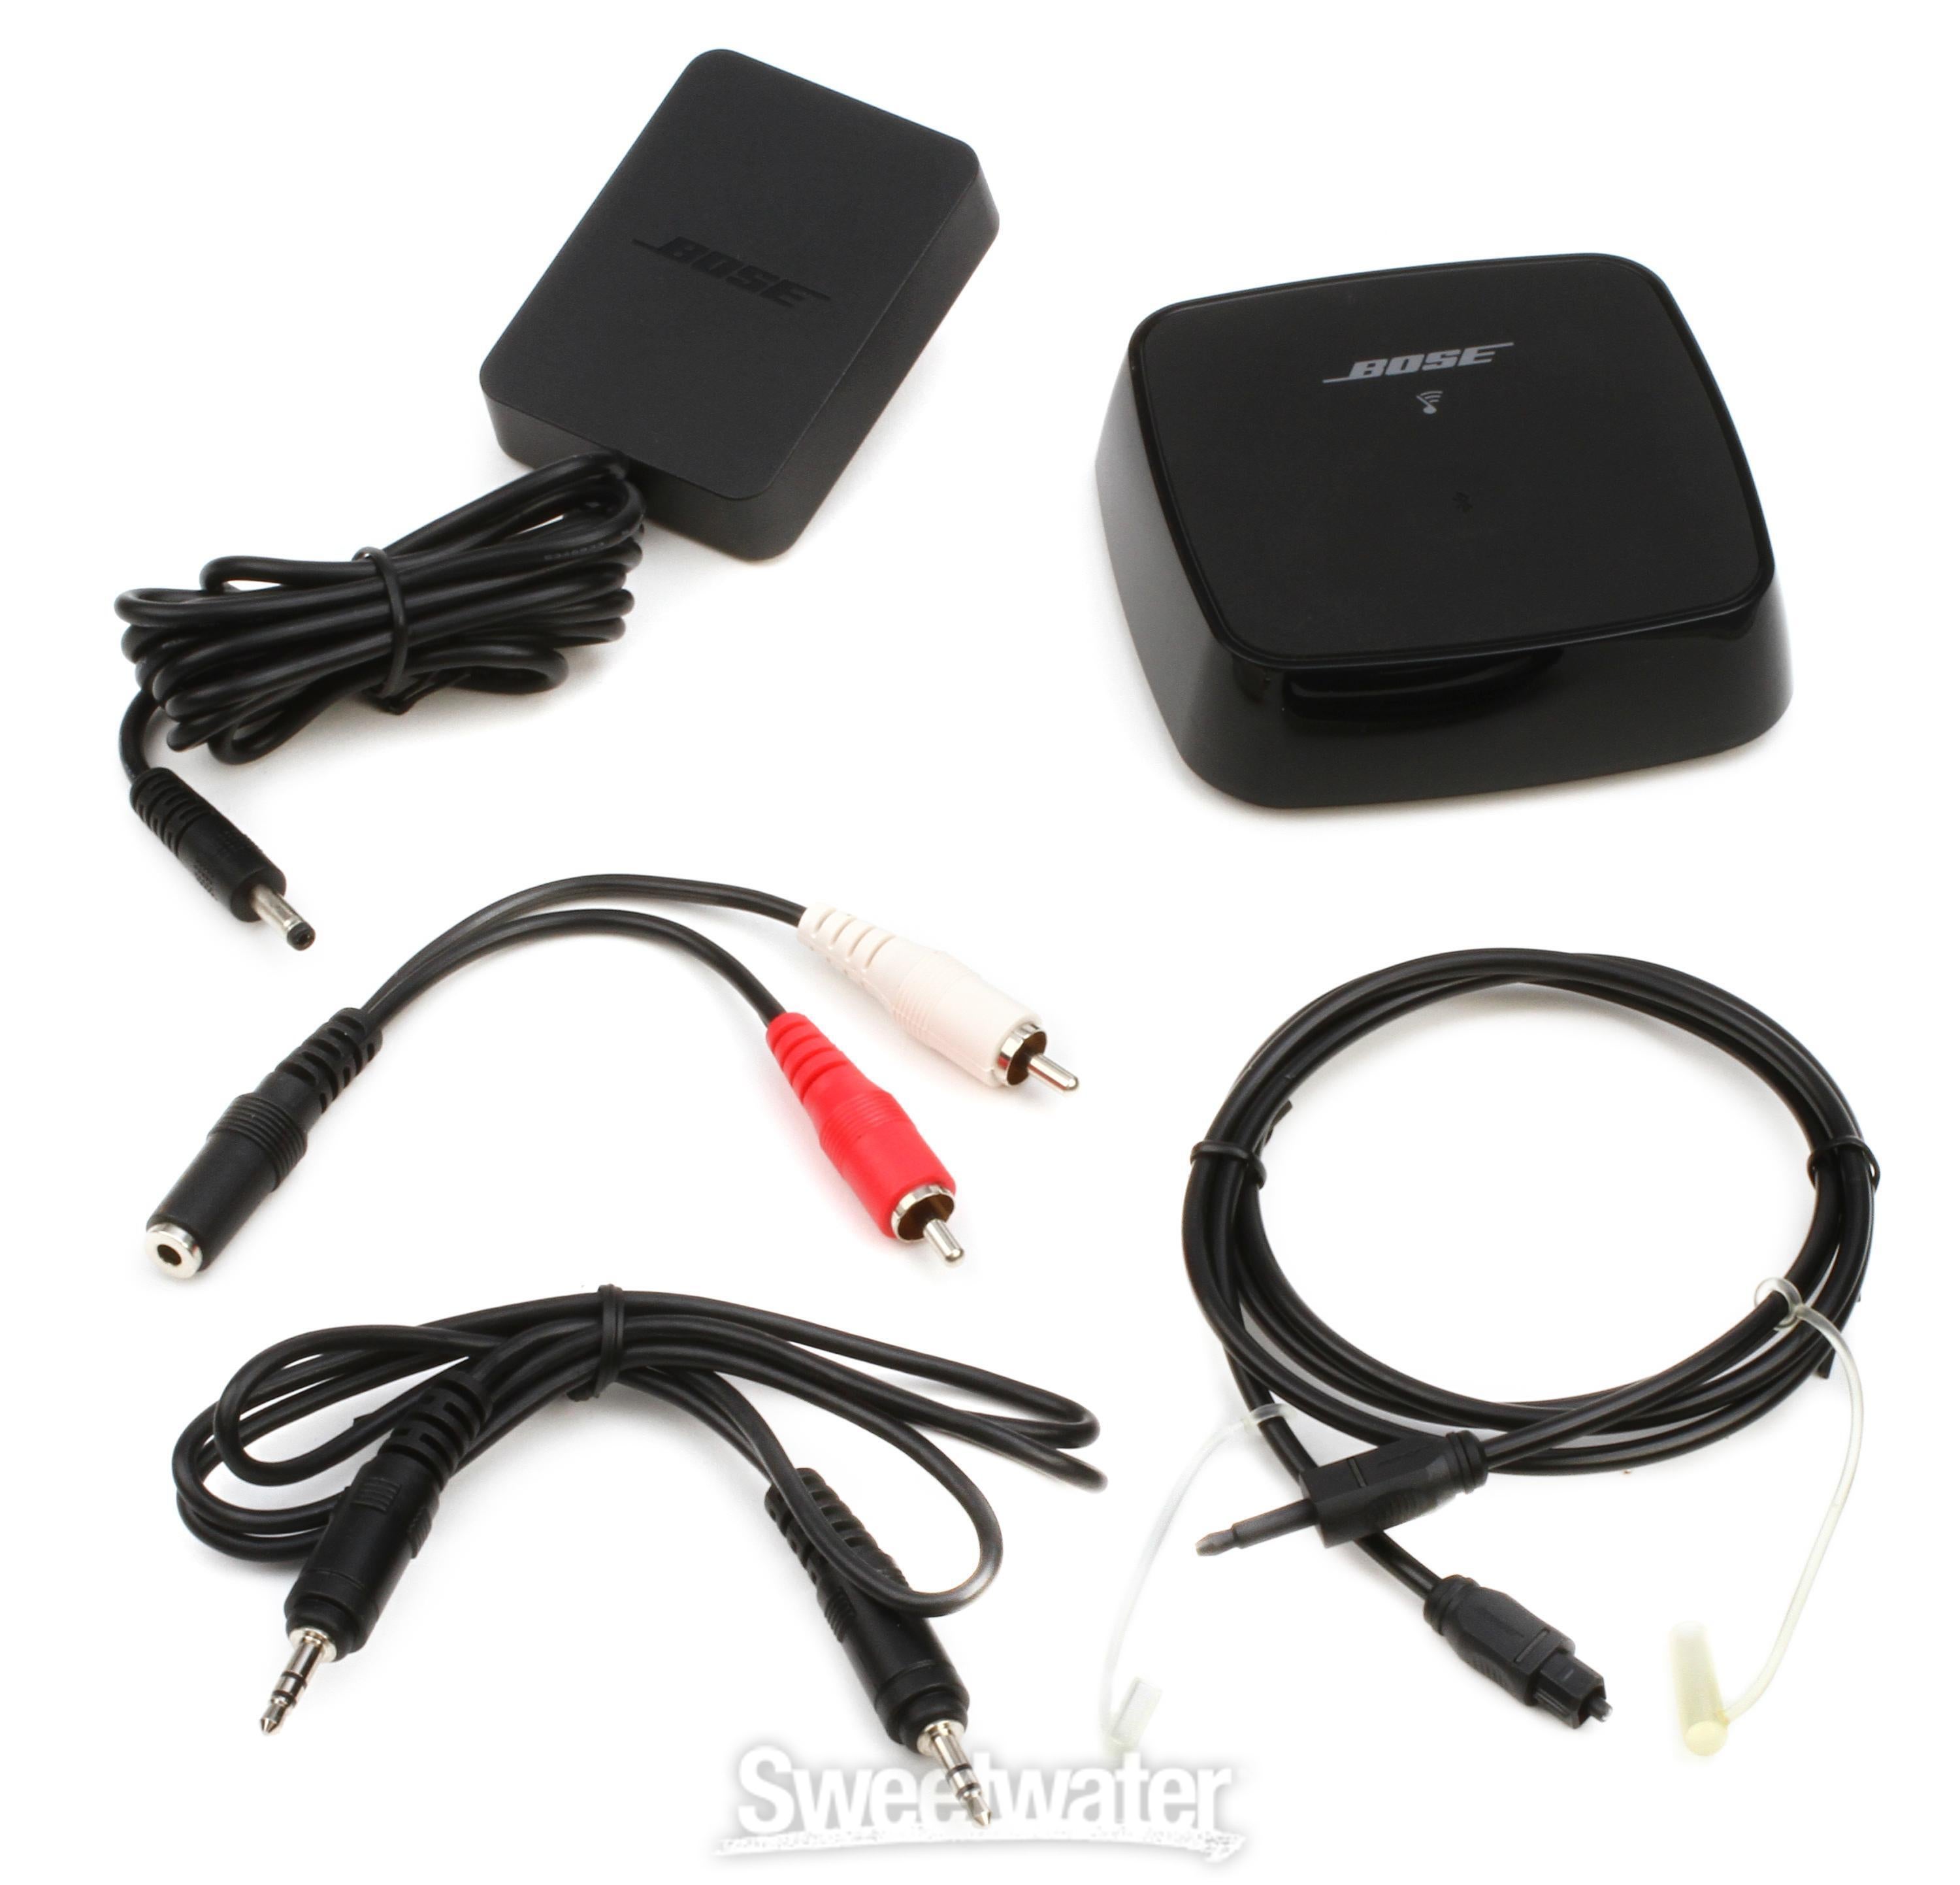 Bose SoundTouch Wireless Link Adapter | Sweetwater